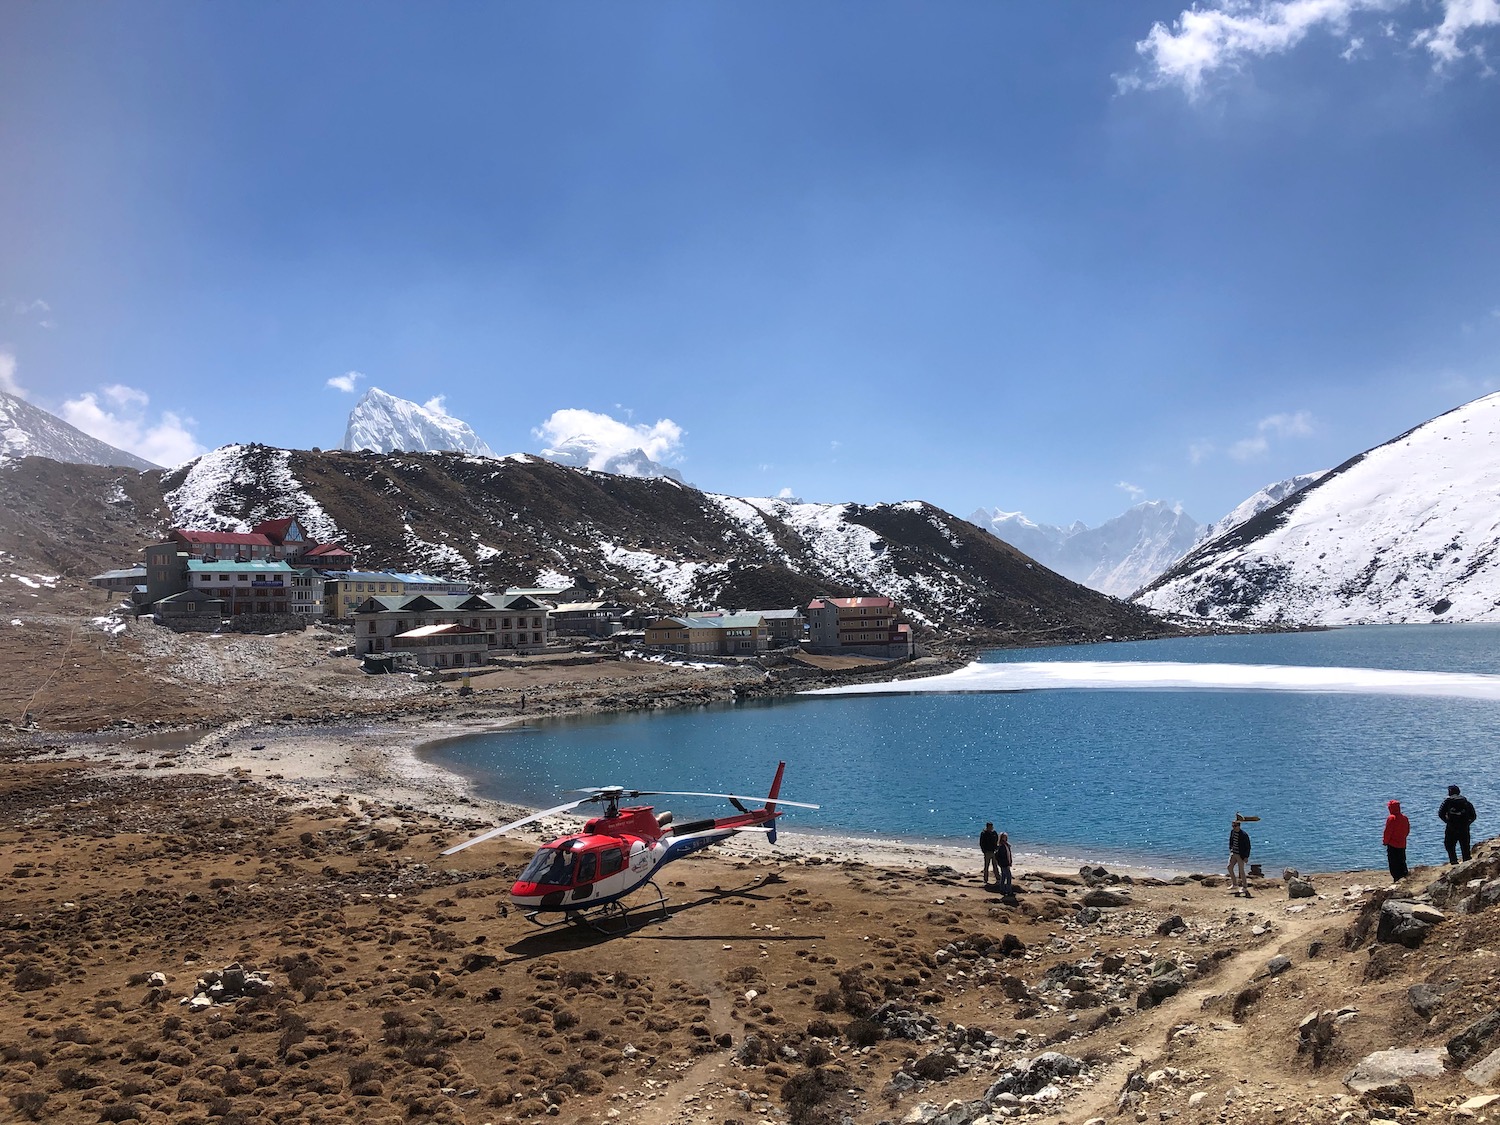 a helicopter on a beach with a body of water and mountains in the background